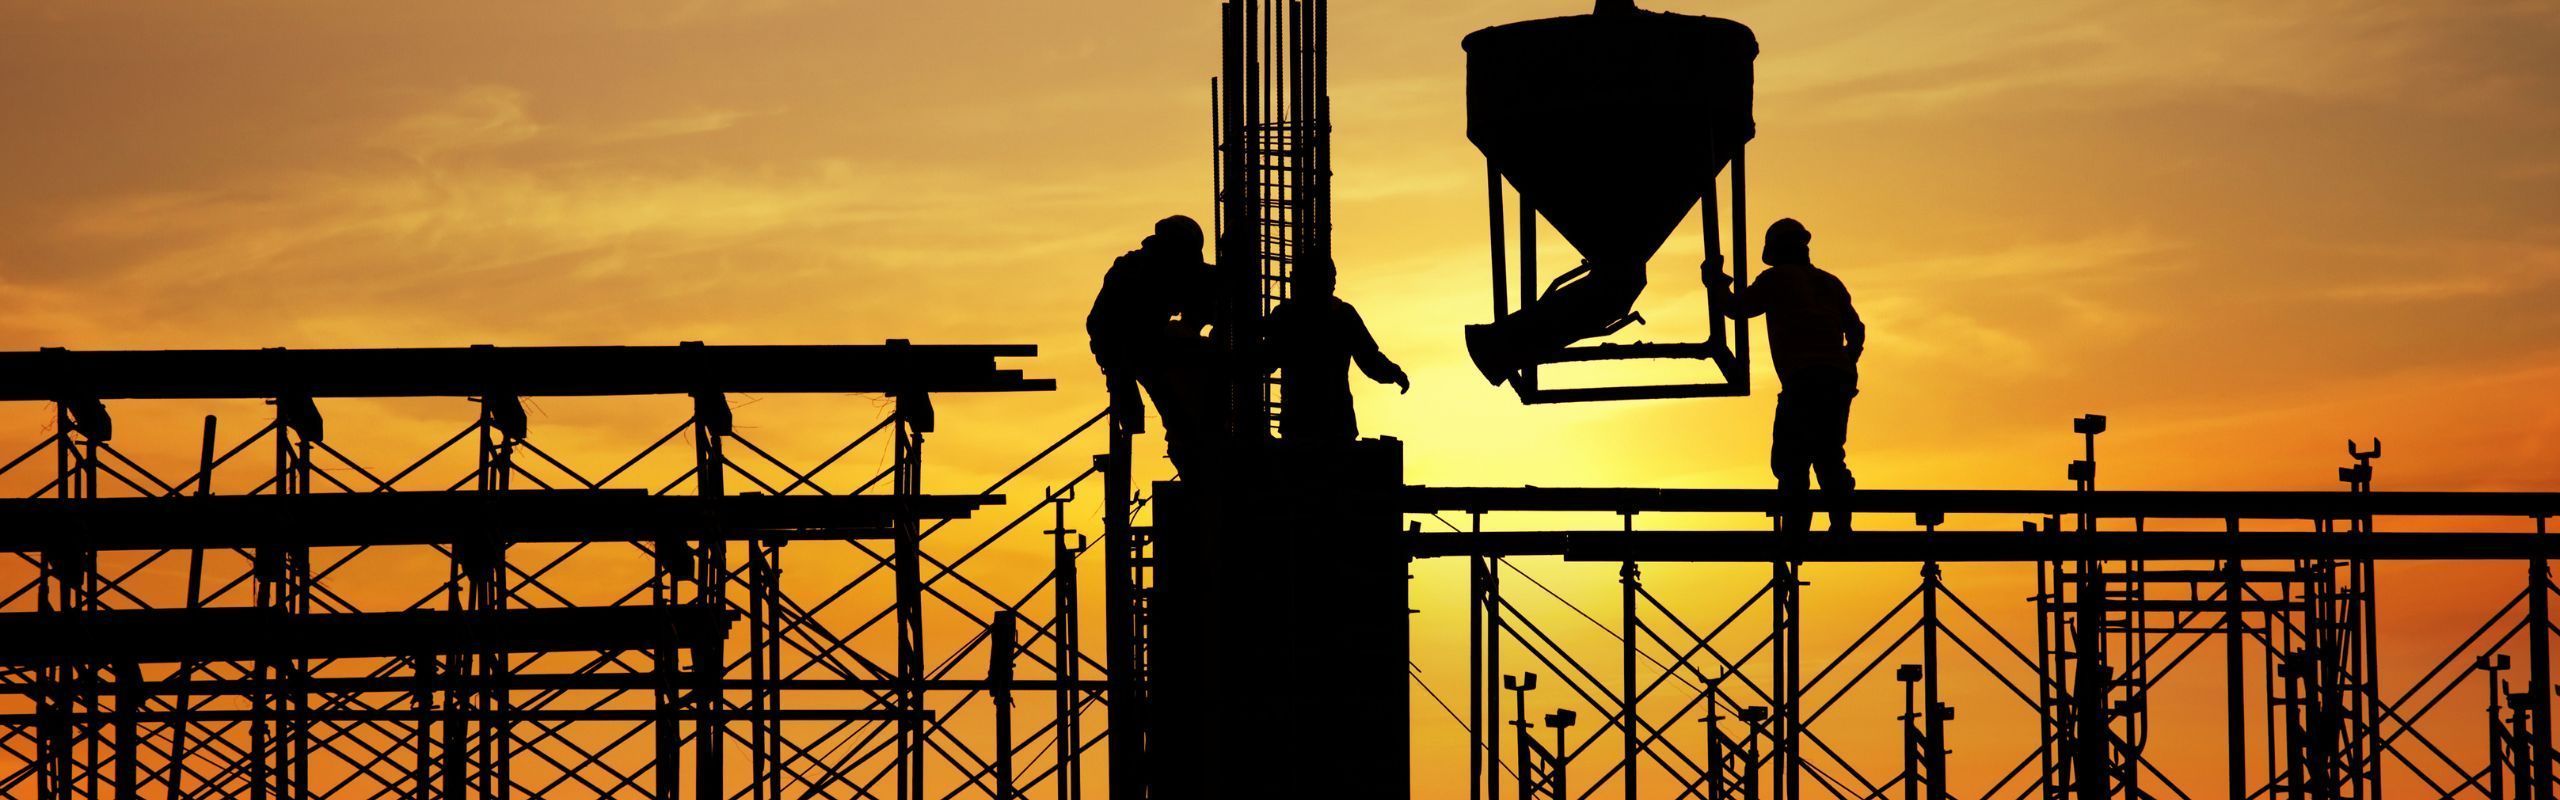 Image of construction workers on equipment against a sunset